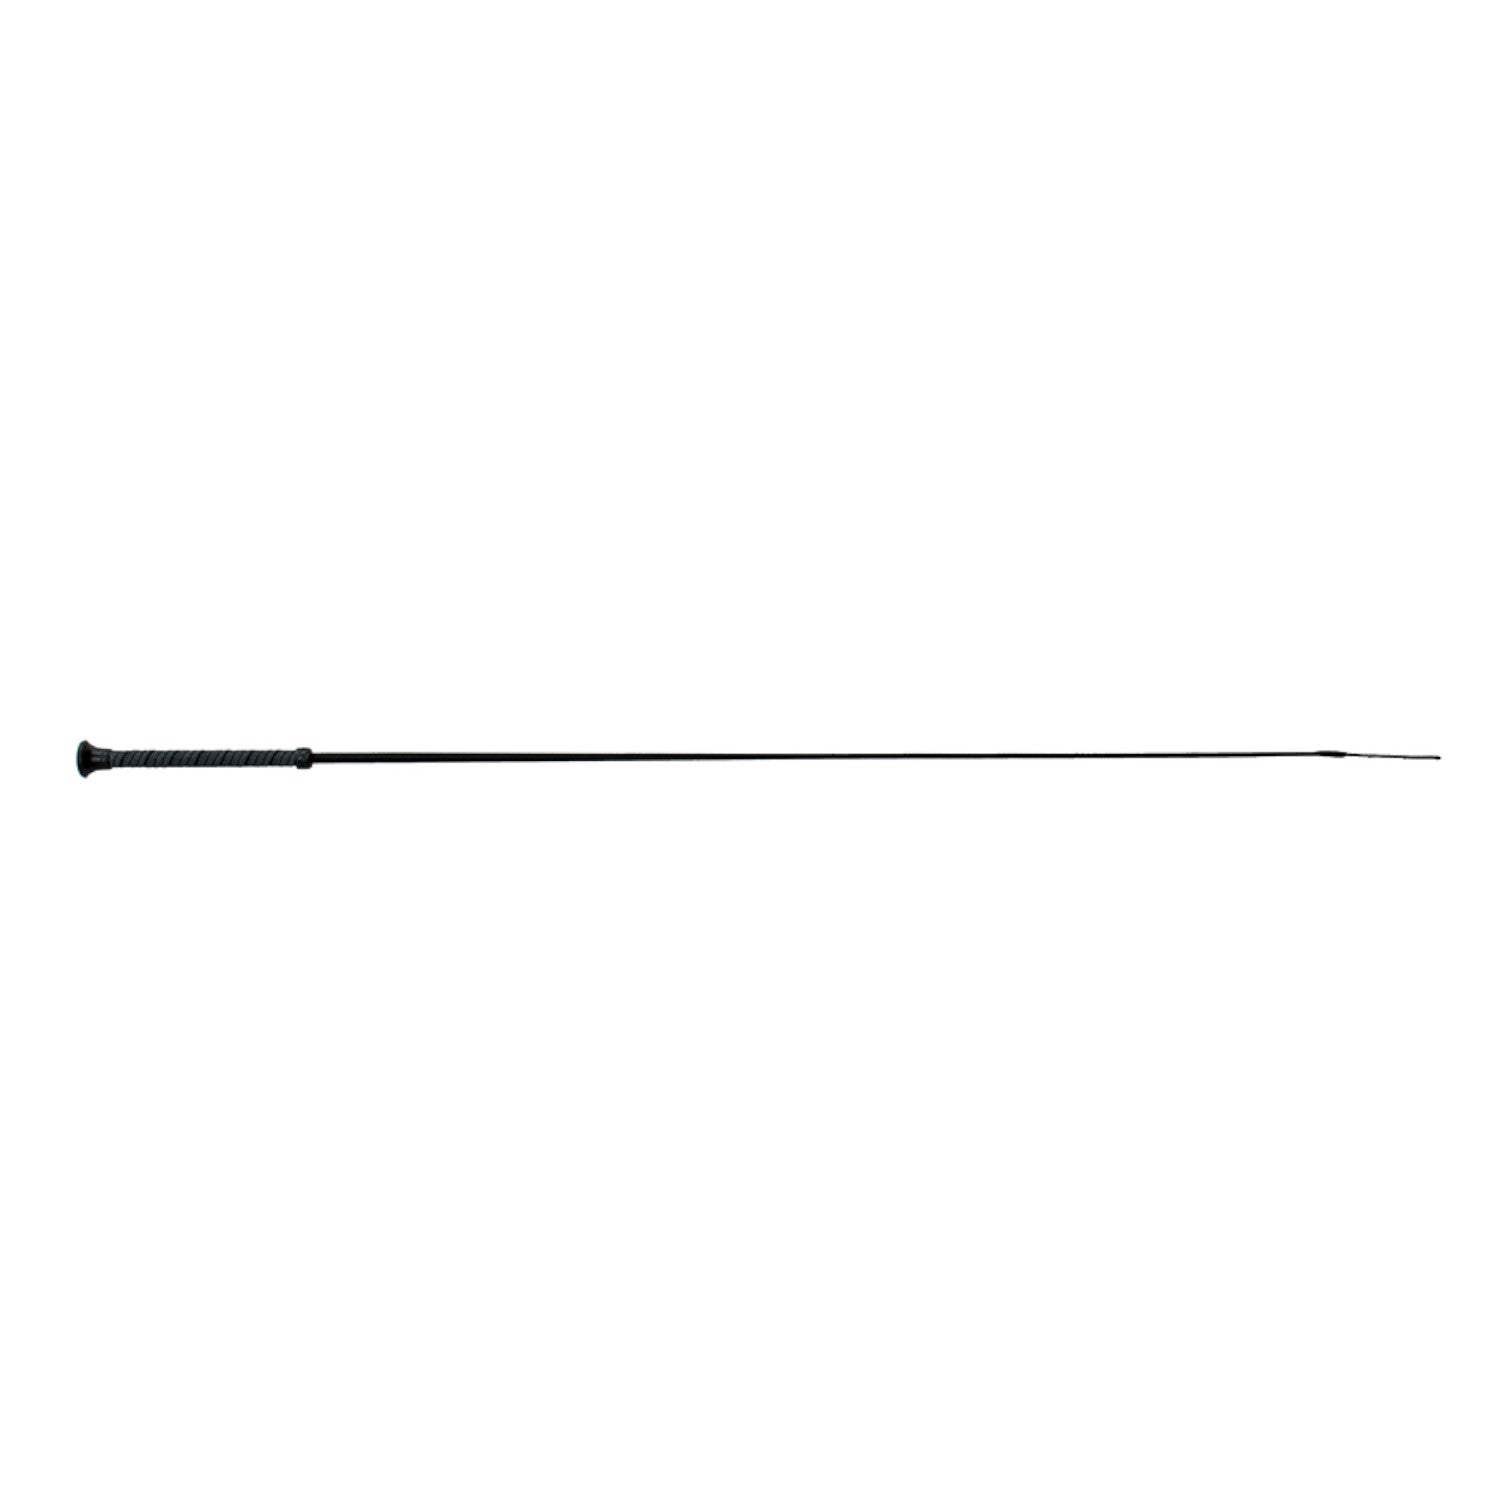 Fleck Dressage Whip With Sure Grip Handle